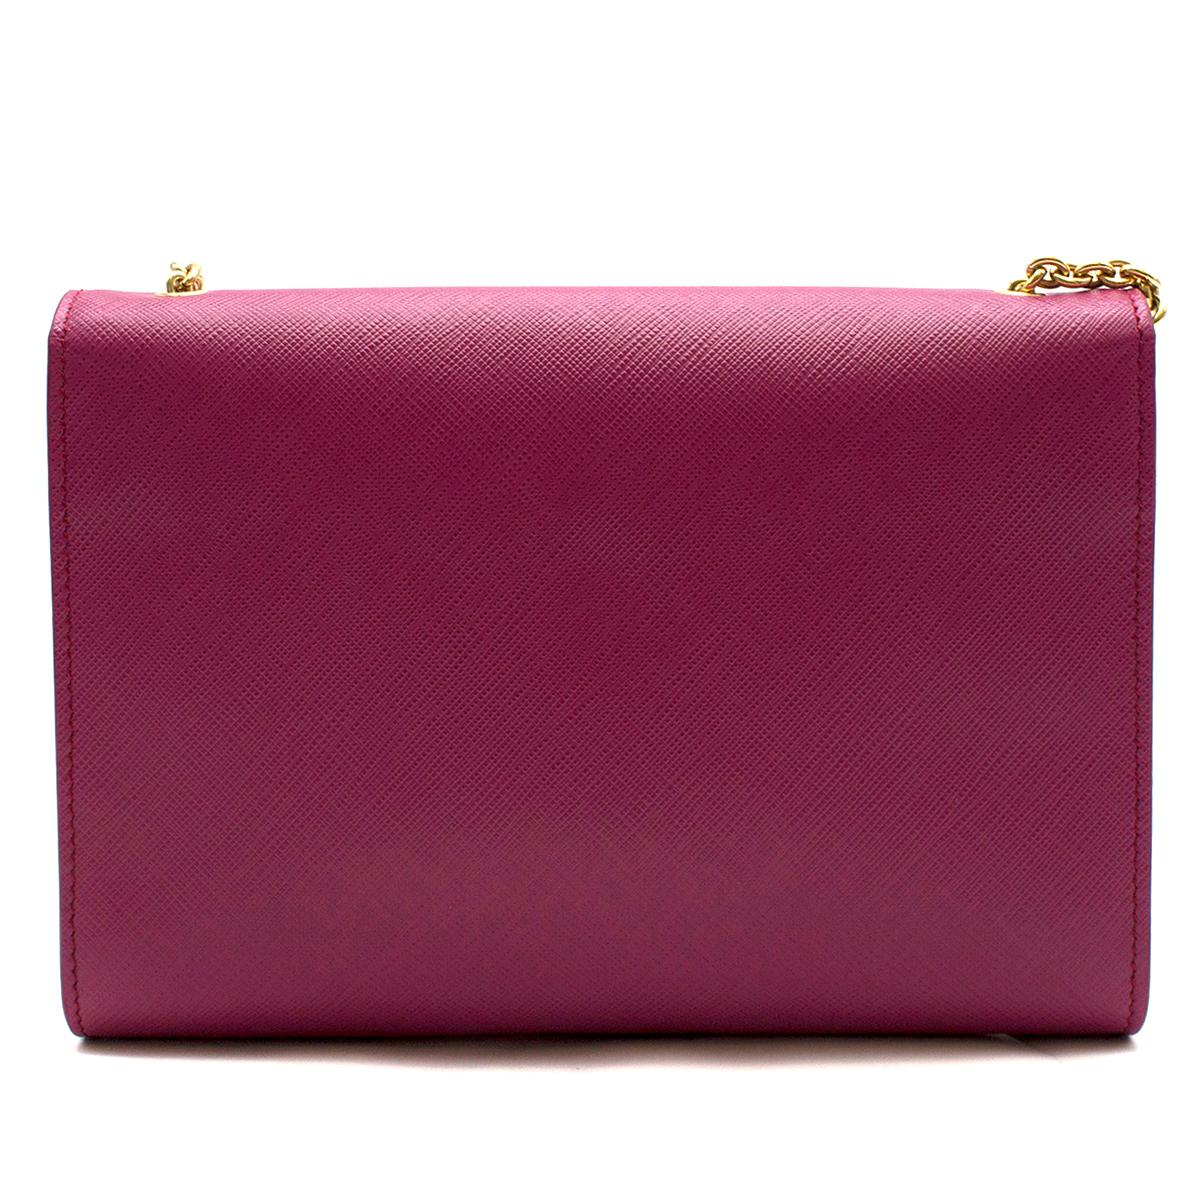 Salvatore Ferragamo Pink Leather Medium Ginny Shoulder Bag

-a front flap closure with the brand's signature grosgrain bow detailing and a chain and leather woven shoulder strap. 
-Opens to a satin lined interior and houses a zipped pocket.

Please